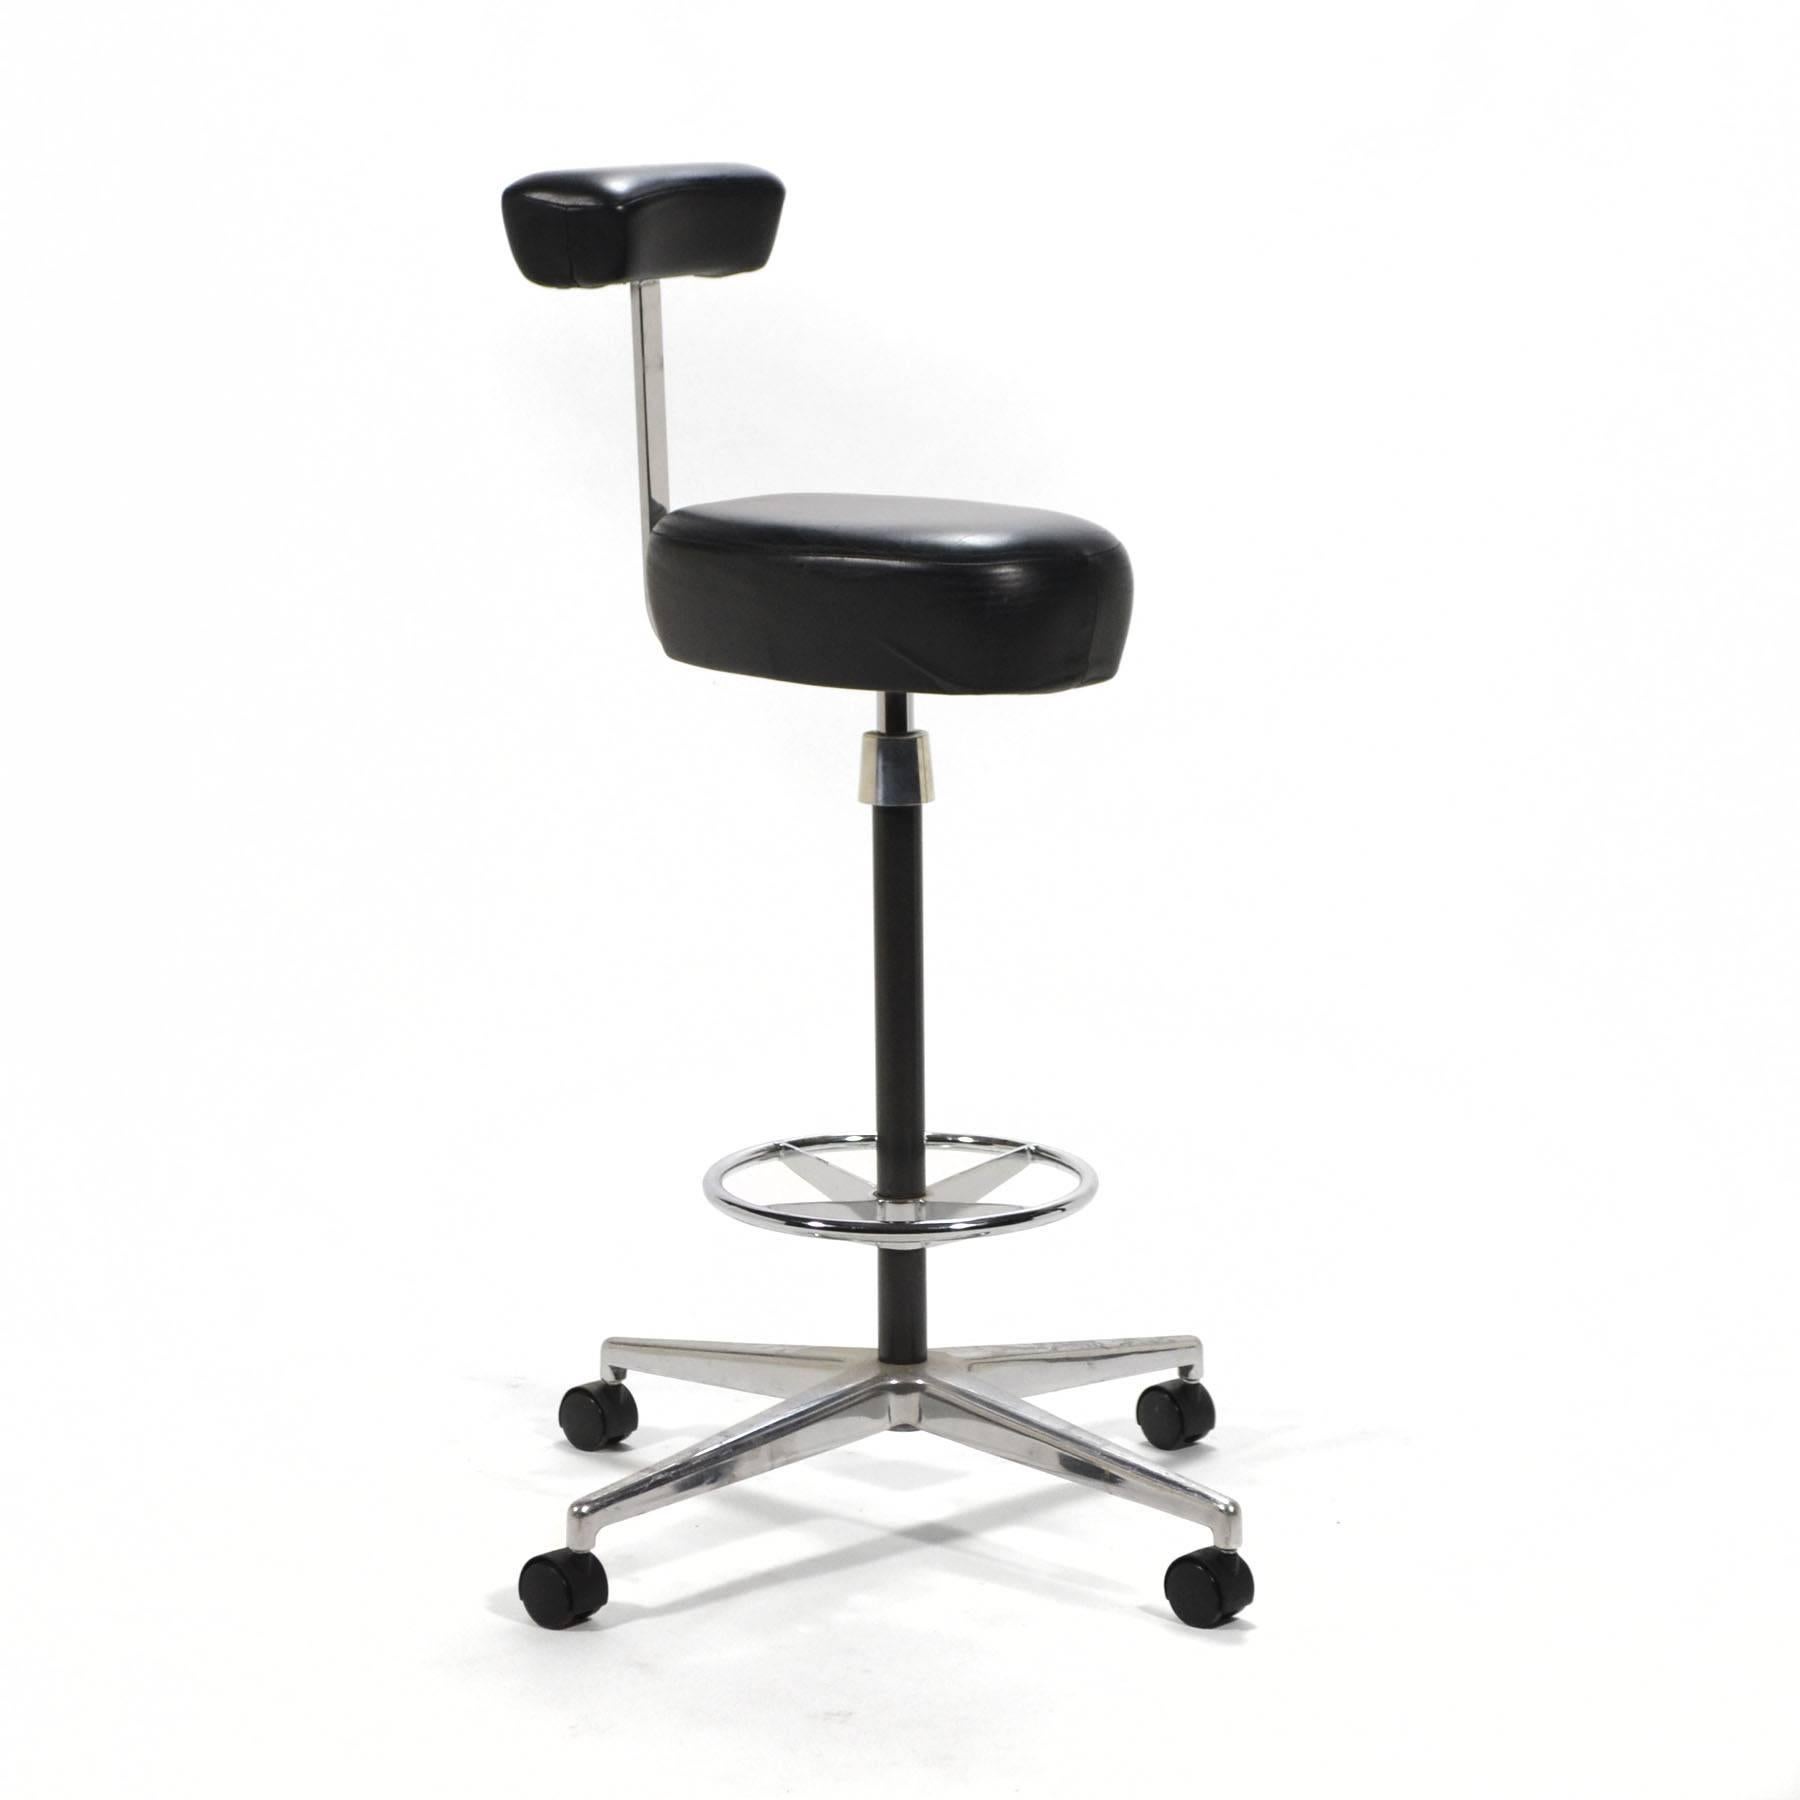 Designed in 1964 as part of the flexible, open, action office program, the Perch by George Nelson & assoc. is a versatile piece. With an adjustable height, it offers a high seat with a small arm/ backrest and a ring footrest. This allows it to be